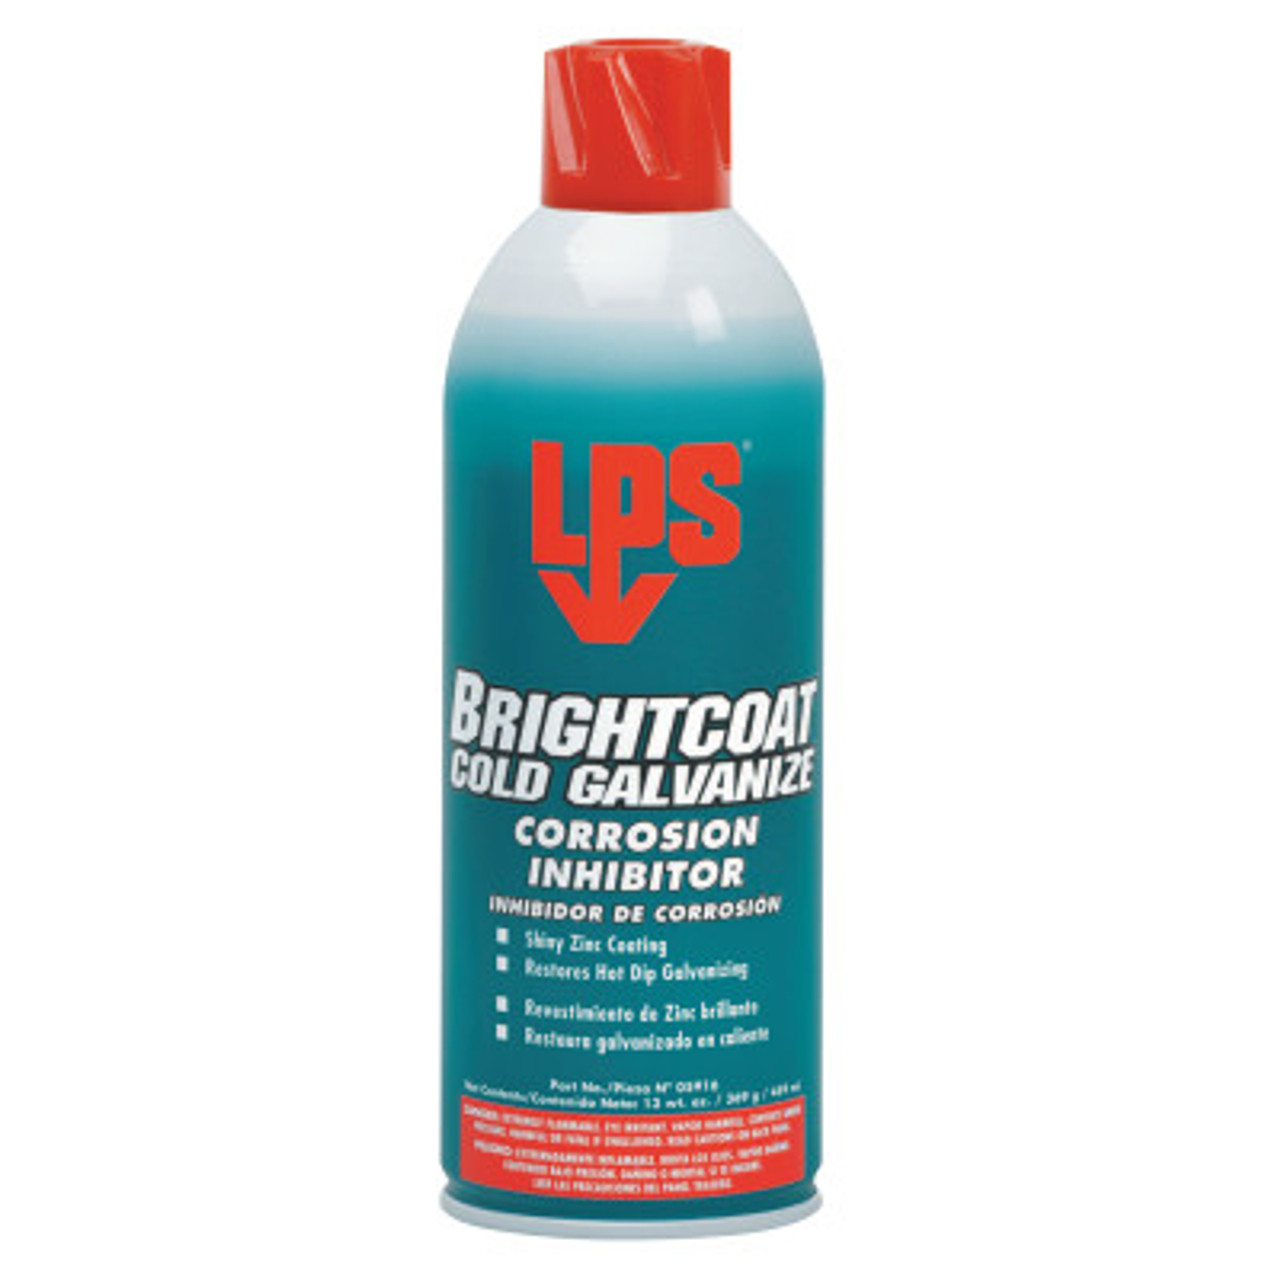 ITW Pro Brands Bright Coat Cold Galvanize Corrosion Inhibitor, 16 oz  Aerosol Can, 12 CAN